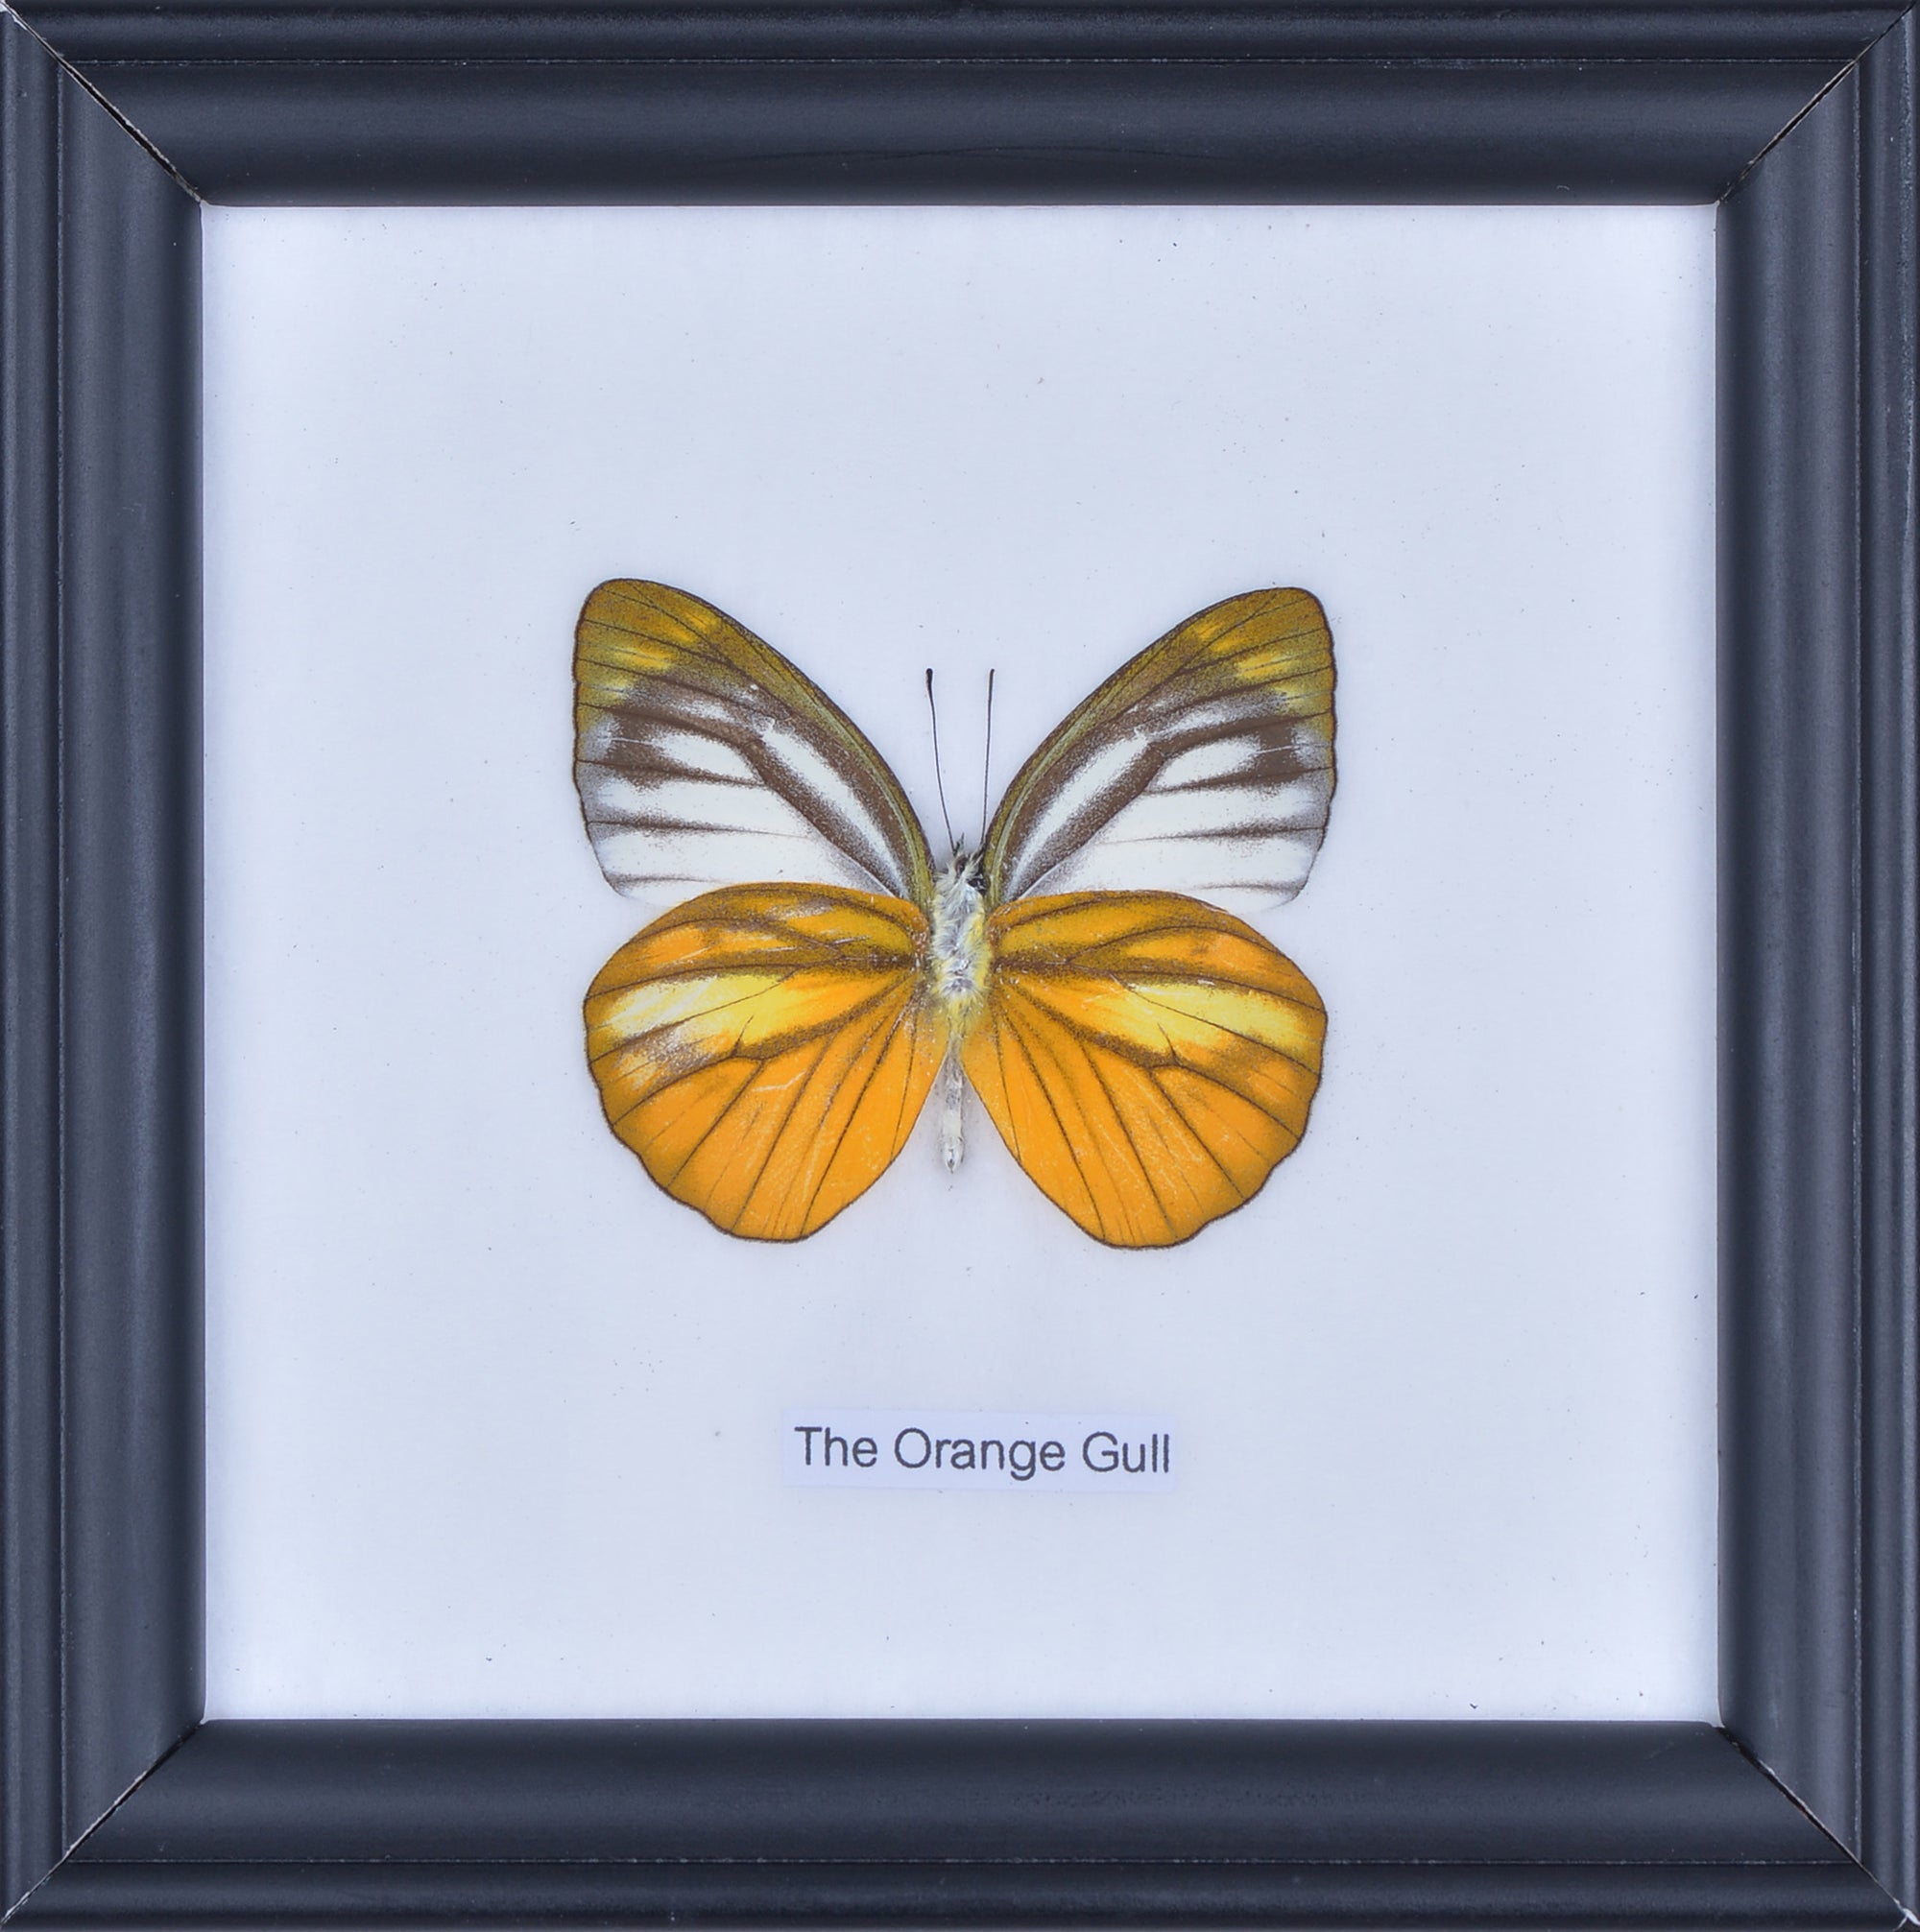 THE ORANGE GULL, Real Butterfly Mounted Under Glass, Wall Hanging Home Décor Framed 5 x 5 In. Gift Boxed